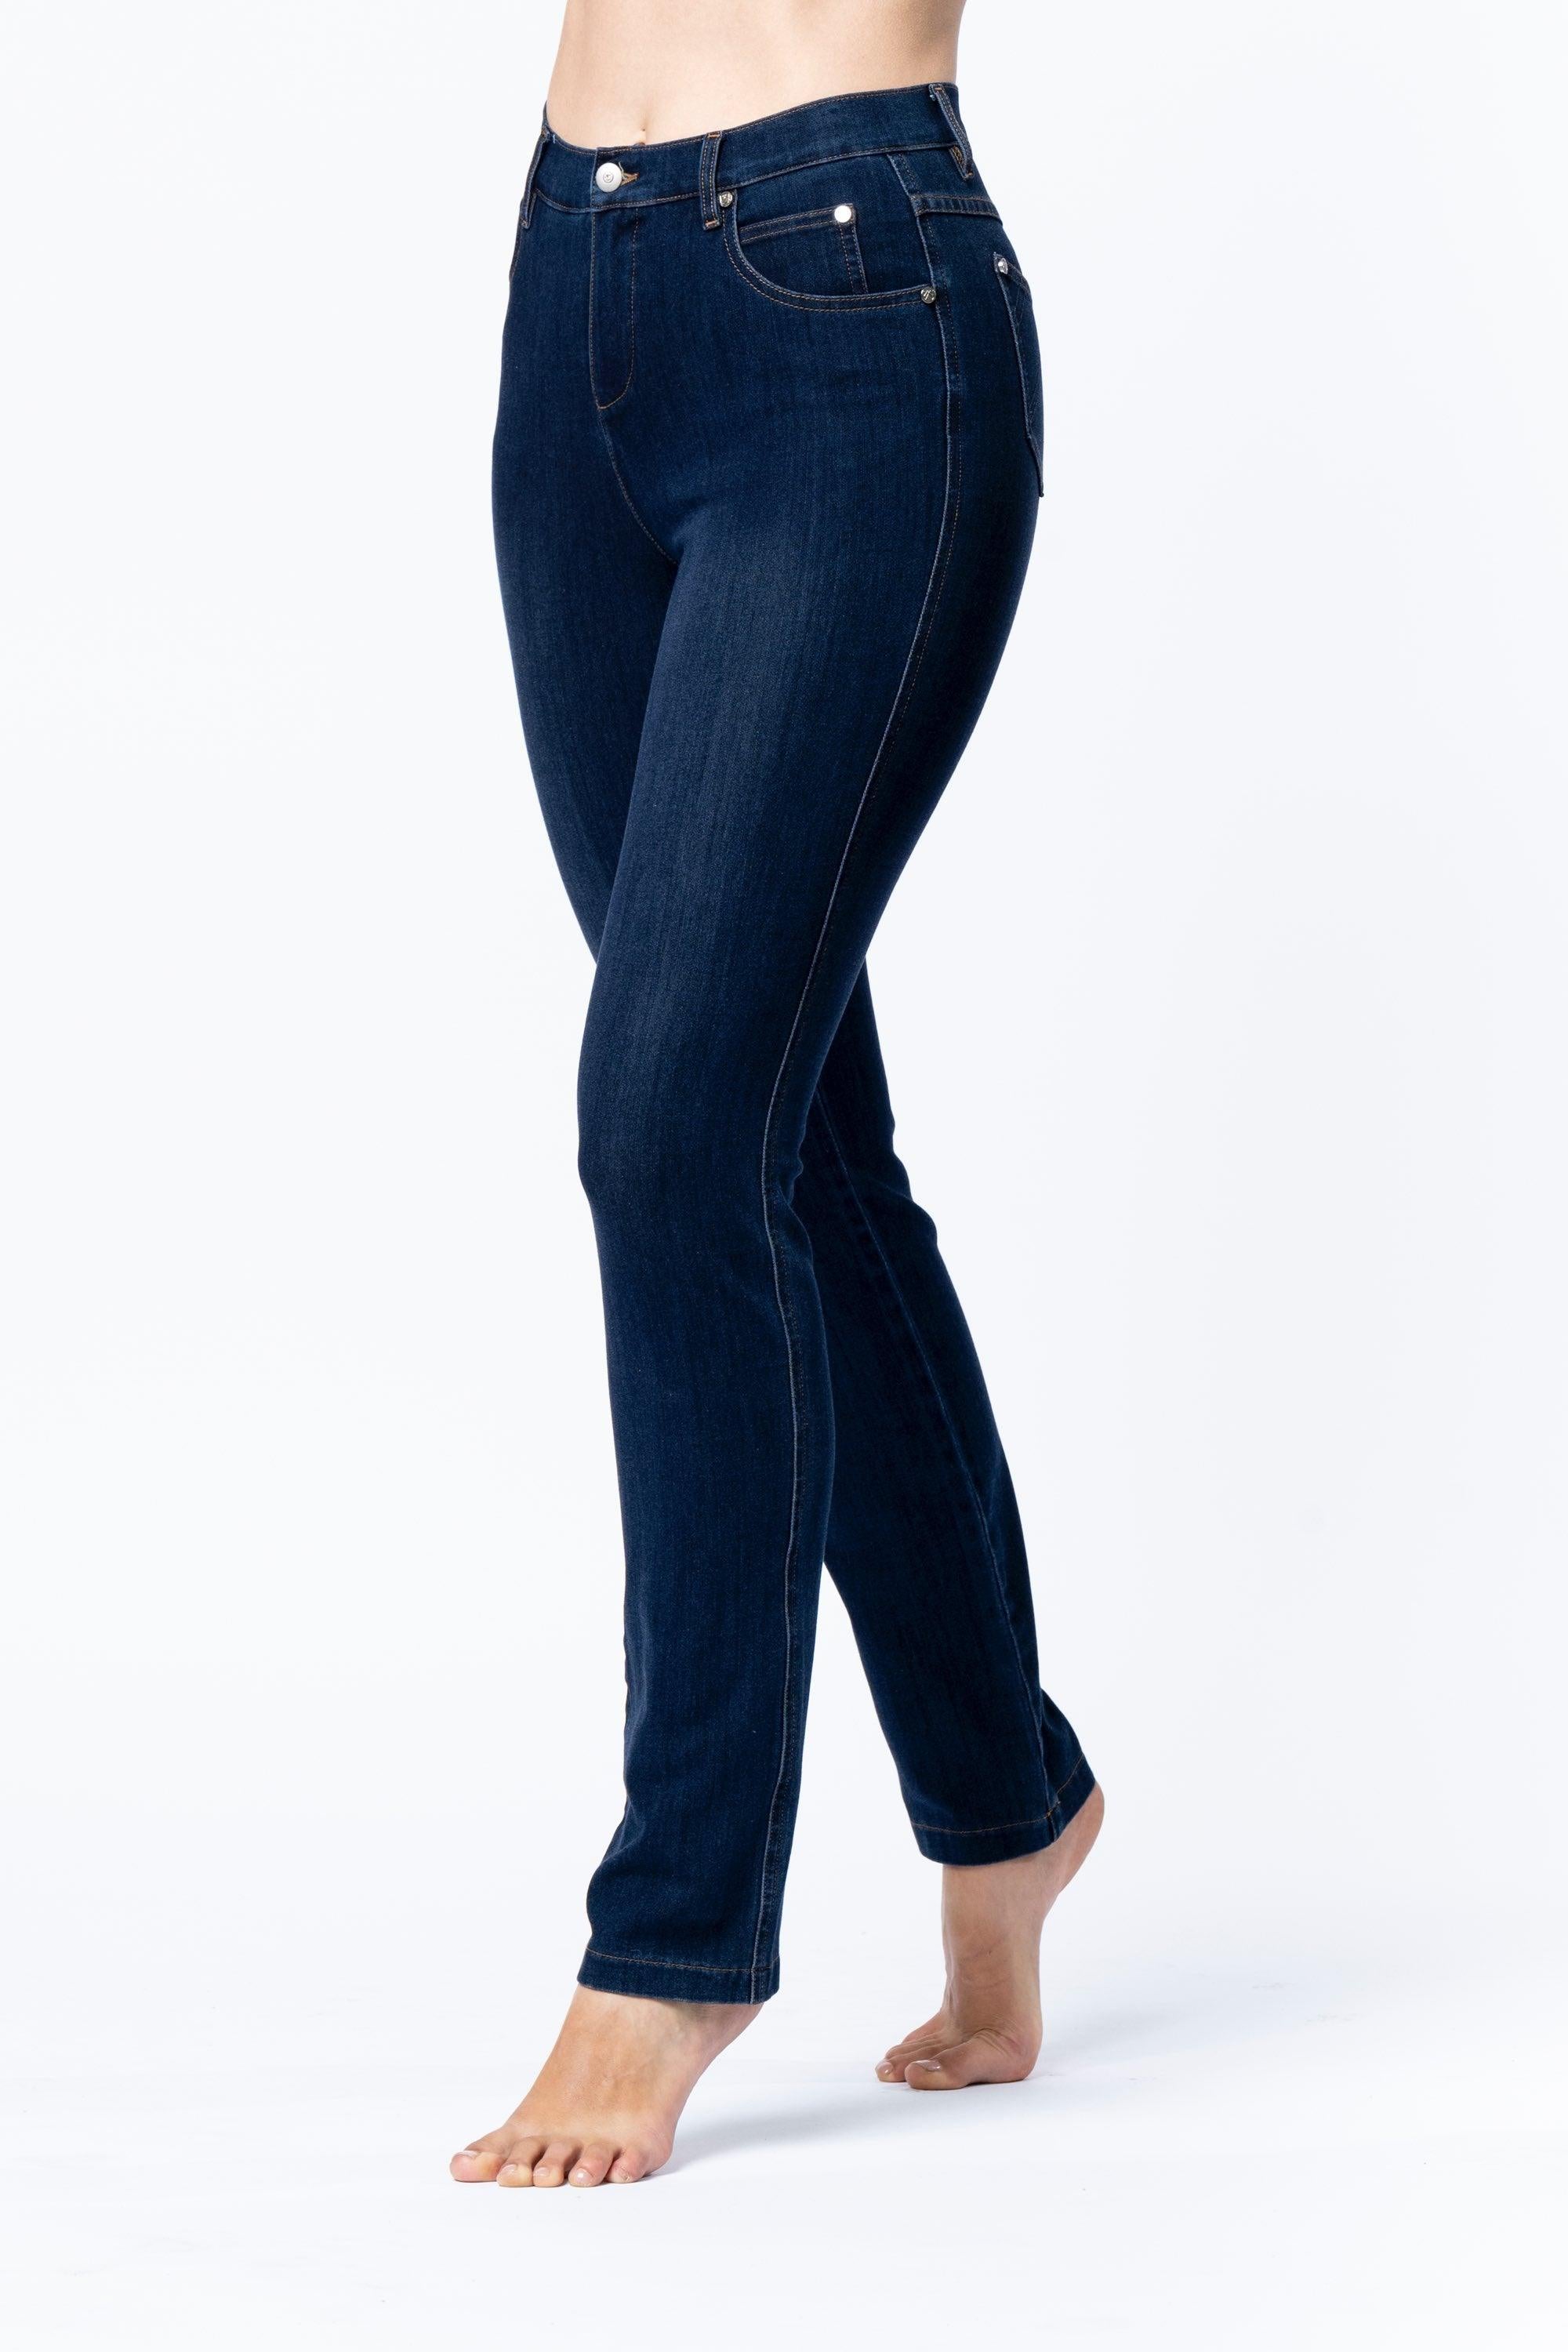 Marble 4 way stretch jeans M2408 - Solitaire Fashions Darwen